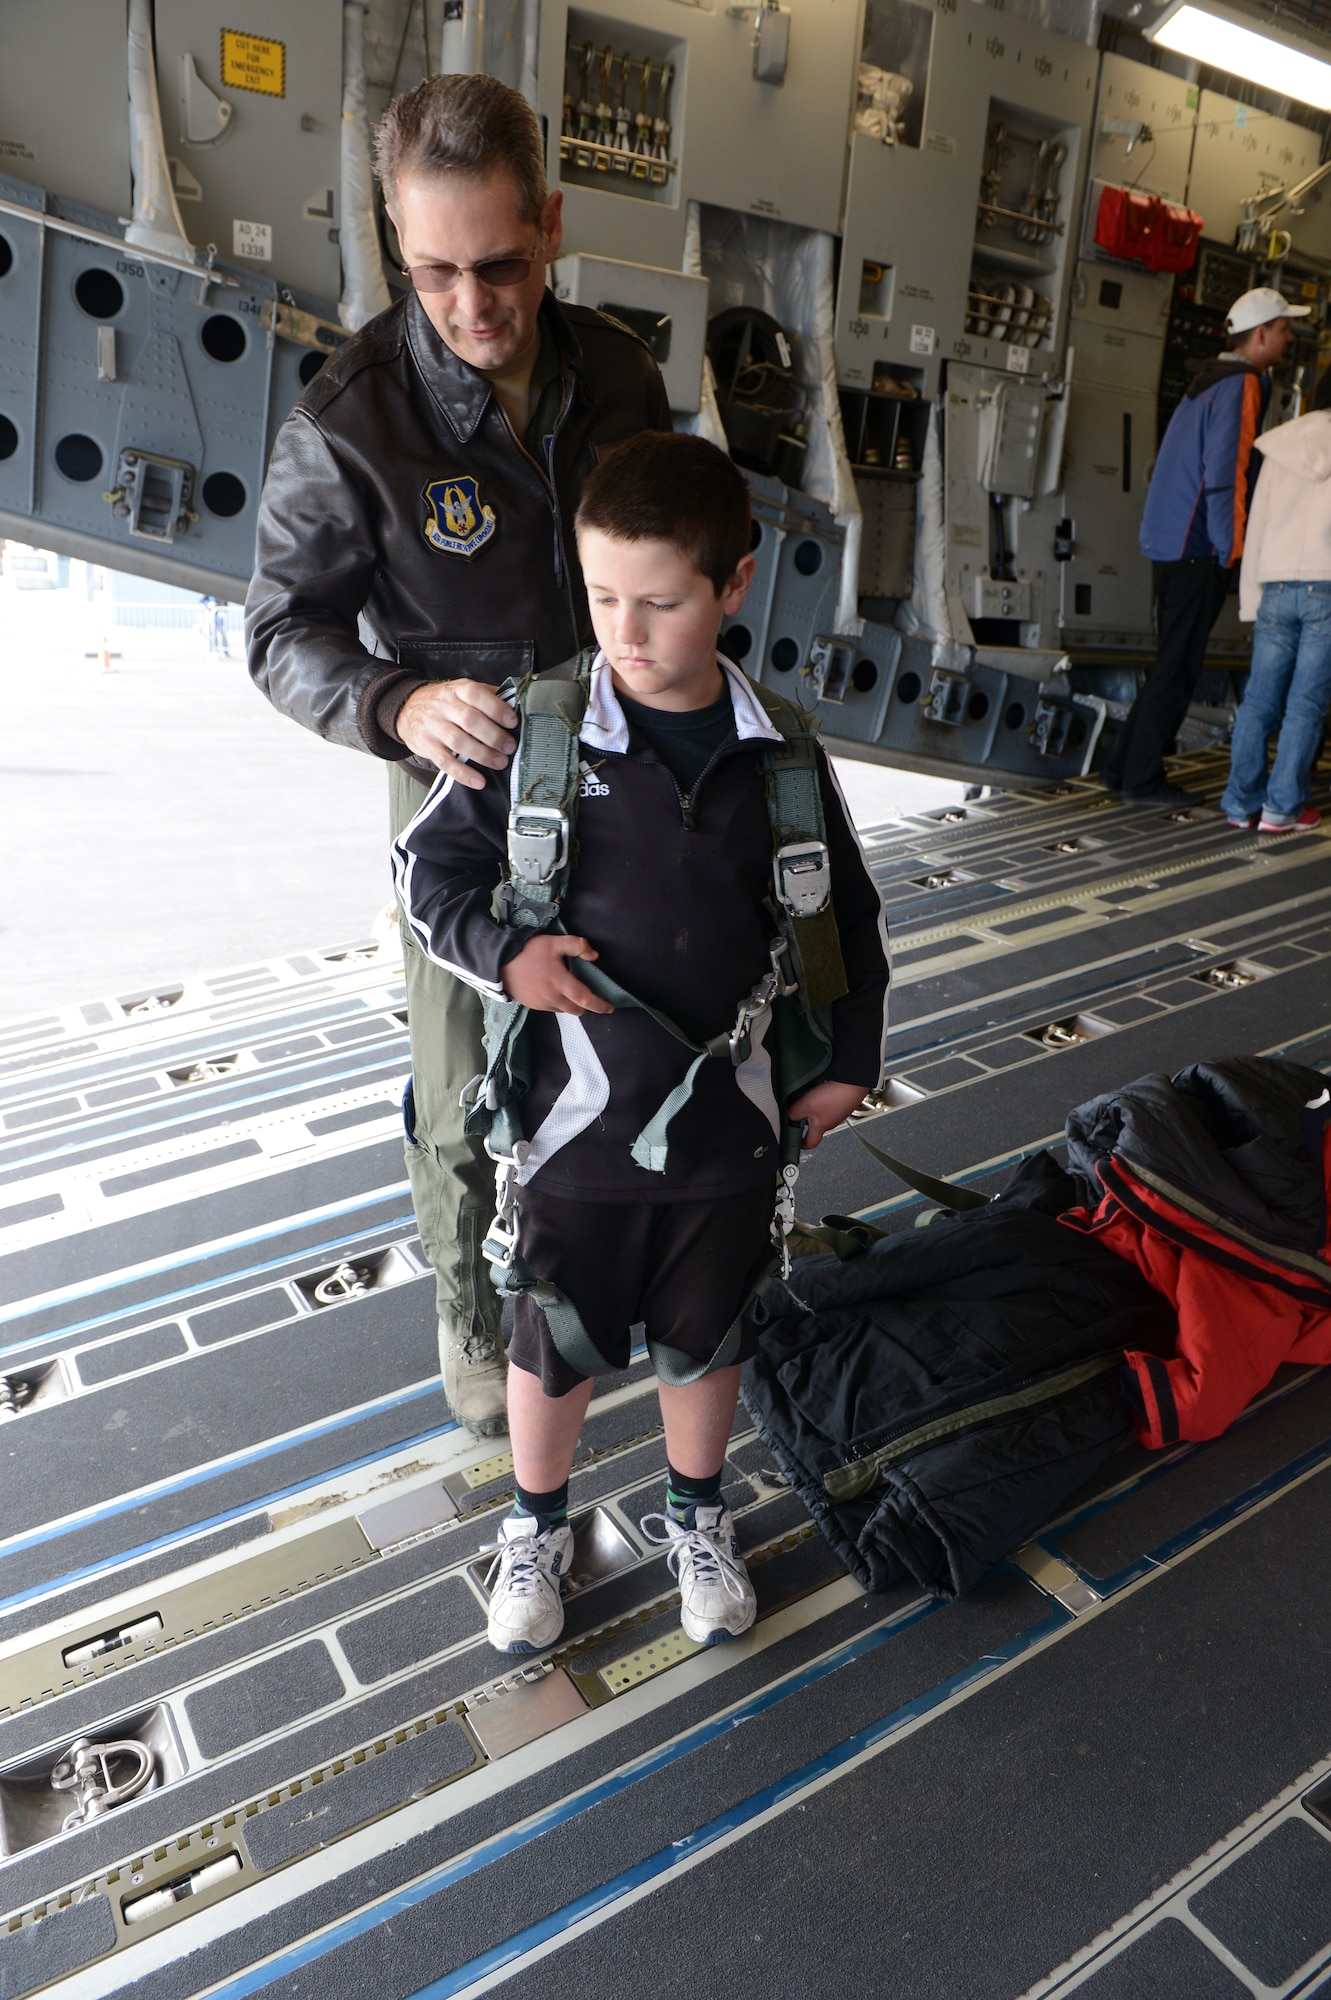 Chief Master Sgt. Jim Masura, 304th Expeditionary Airlift Squadron superintendent and 97th Airlift Squadron resource manager, helps a young New Zealander try on a parachute rigging on the C-17 Globemaster III, Oct. 5th, 2014, as part of the U.S. Antarctic Program Day for IceFest 2014 at Christchurch, New Zealand. Masura spent the entire day answering questions about the aircraft and visited with the more than 7,000 guests who attended. (U.S. Air Force photo/Master Sgt. Todd Wivell)